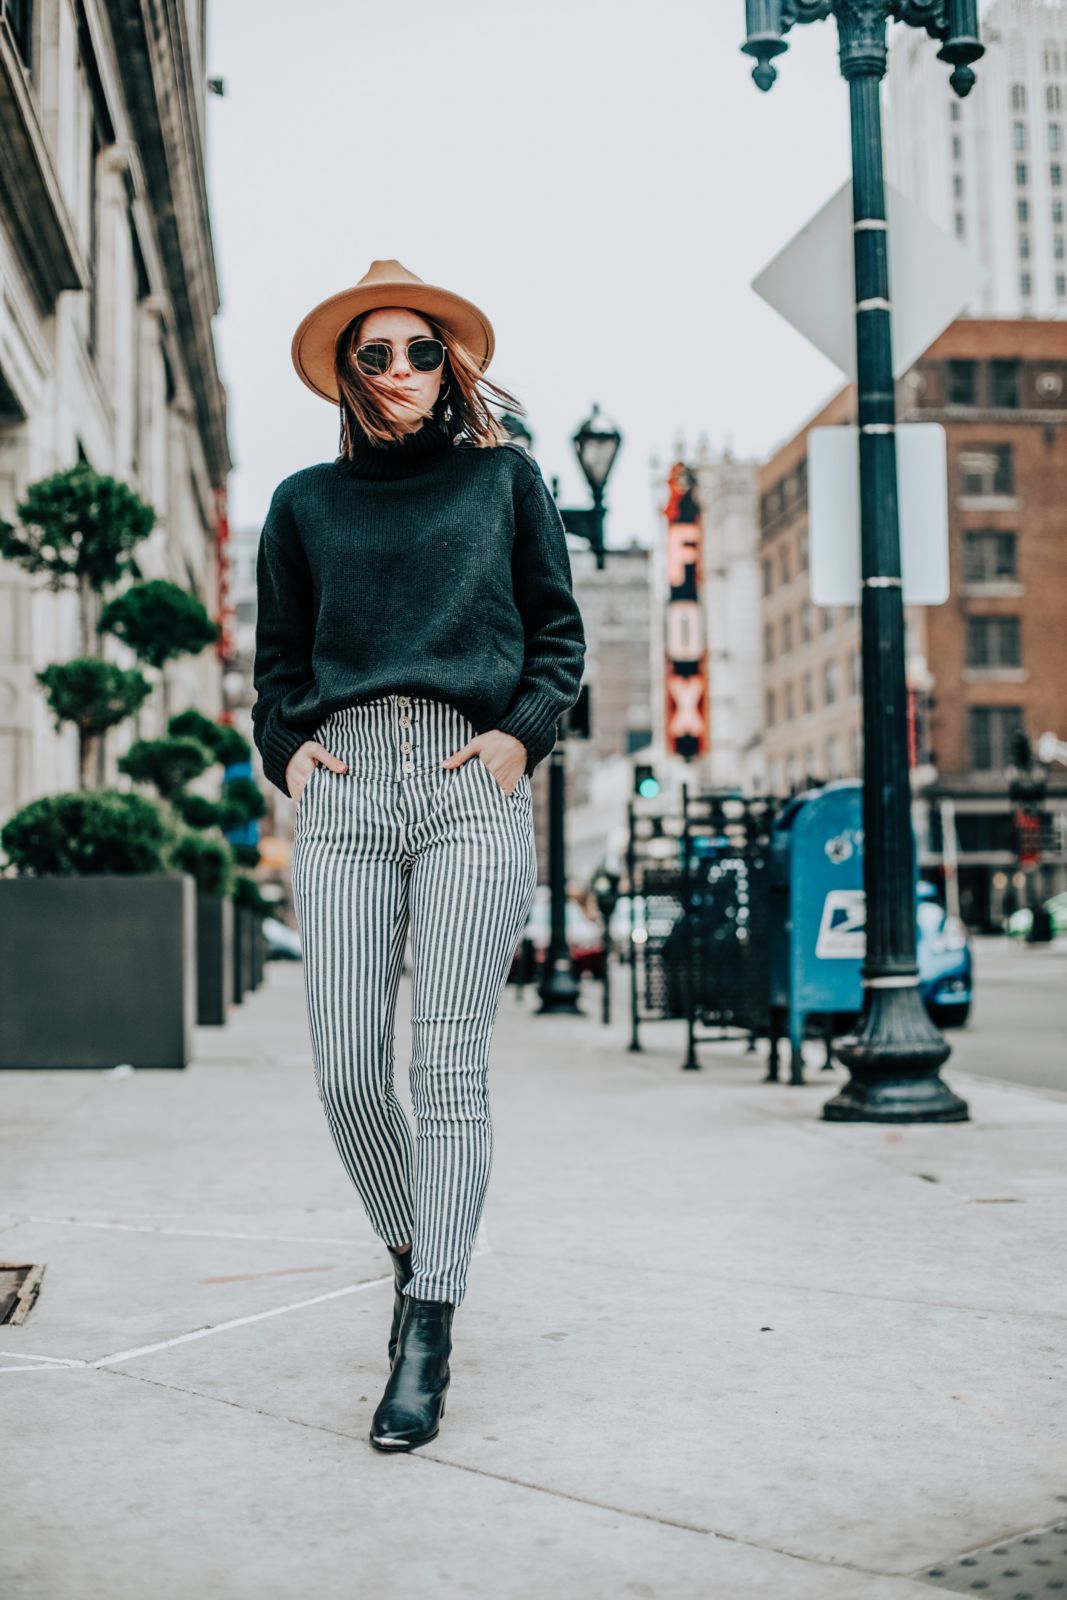 How To Wear Striped Pants 4 Ways | Oh Darling Blog